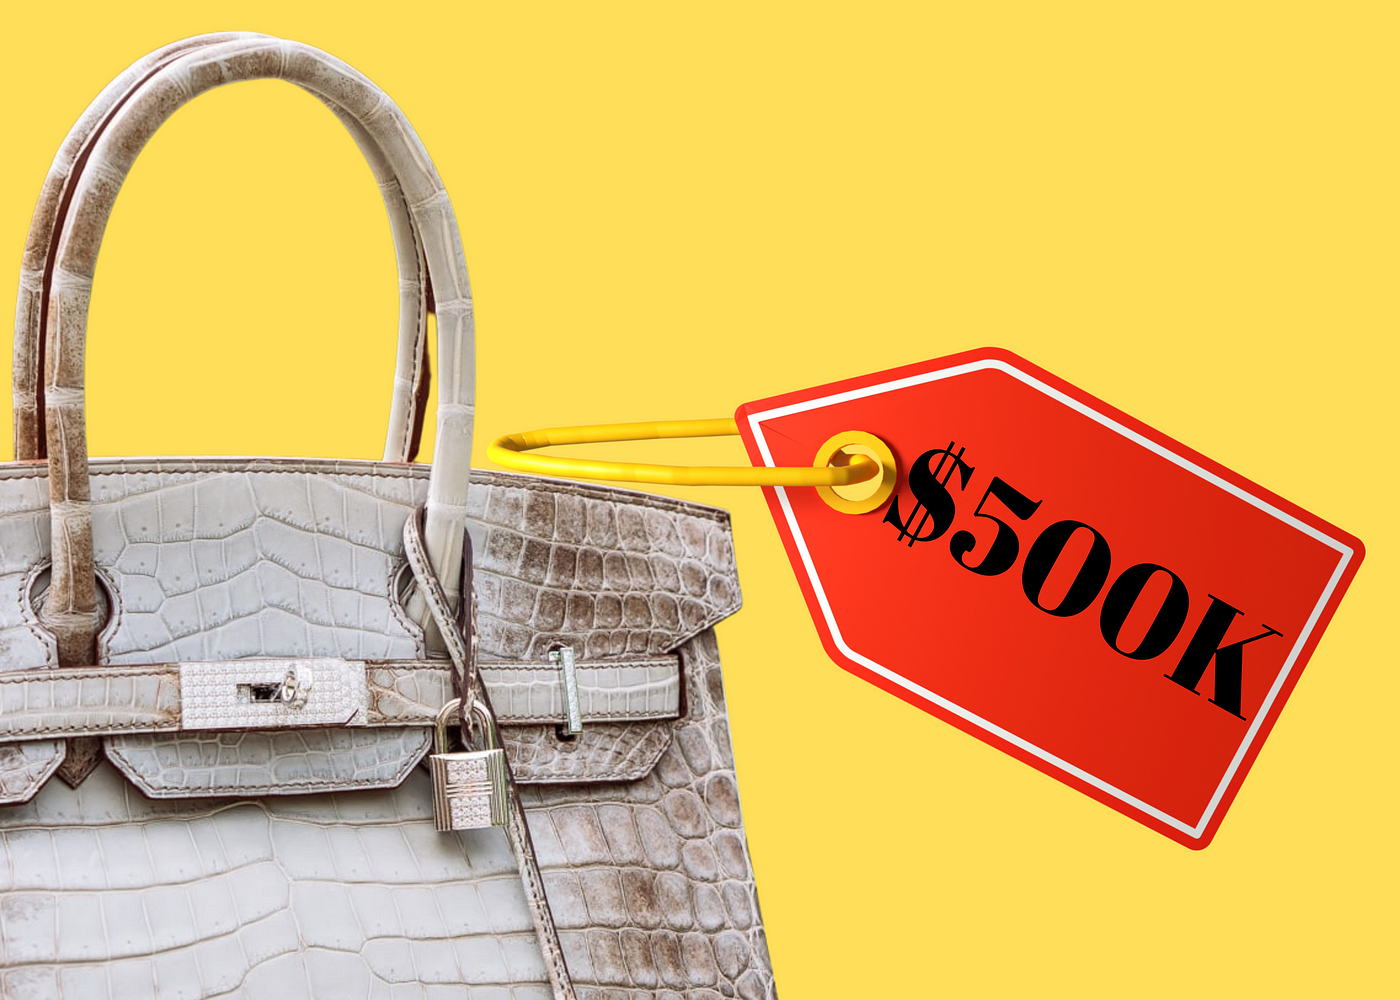 3 Genius Marketing Tips You Can Learn from This $500,000 Handbag, by  Catherine Mancini, The Startup